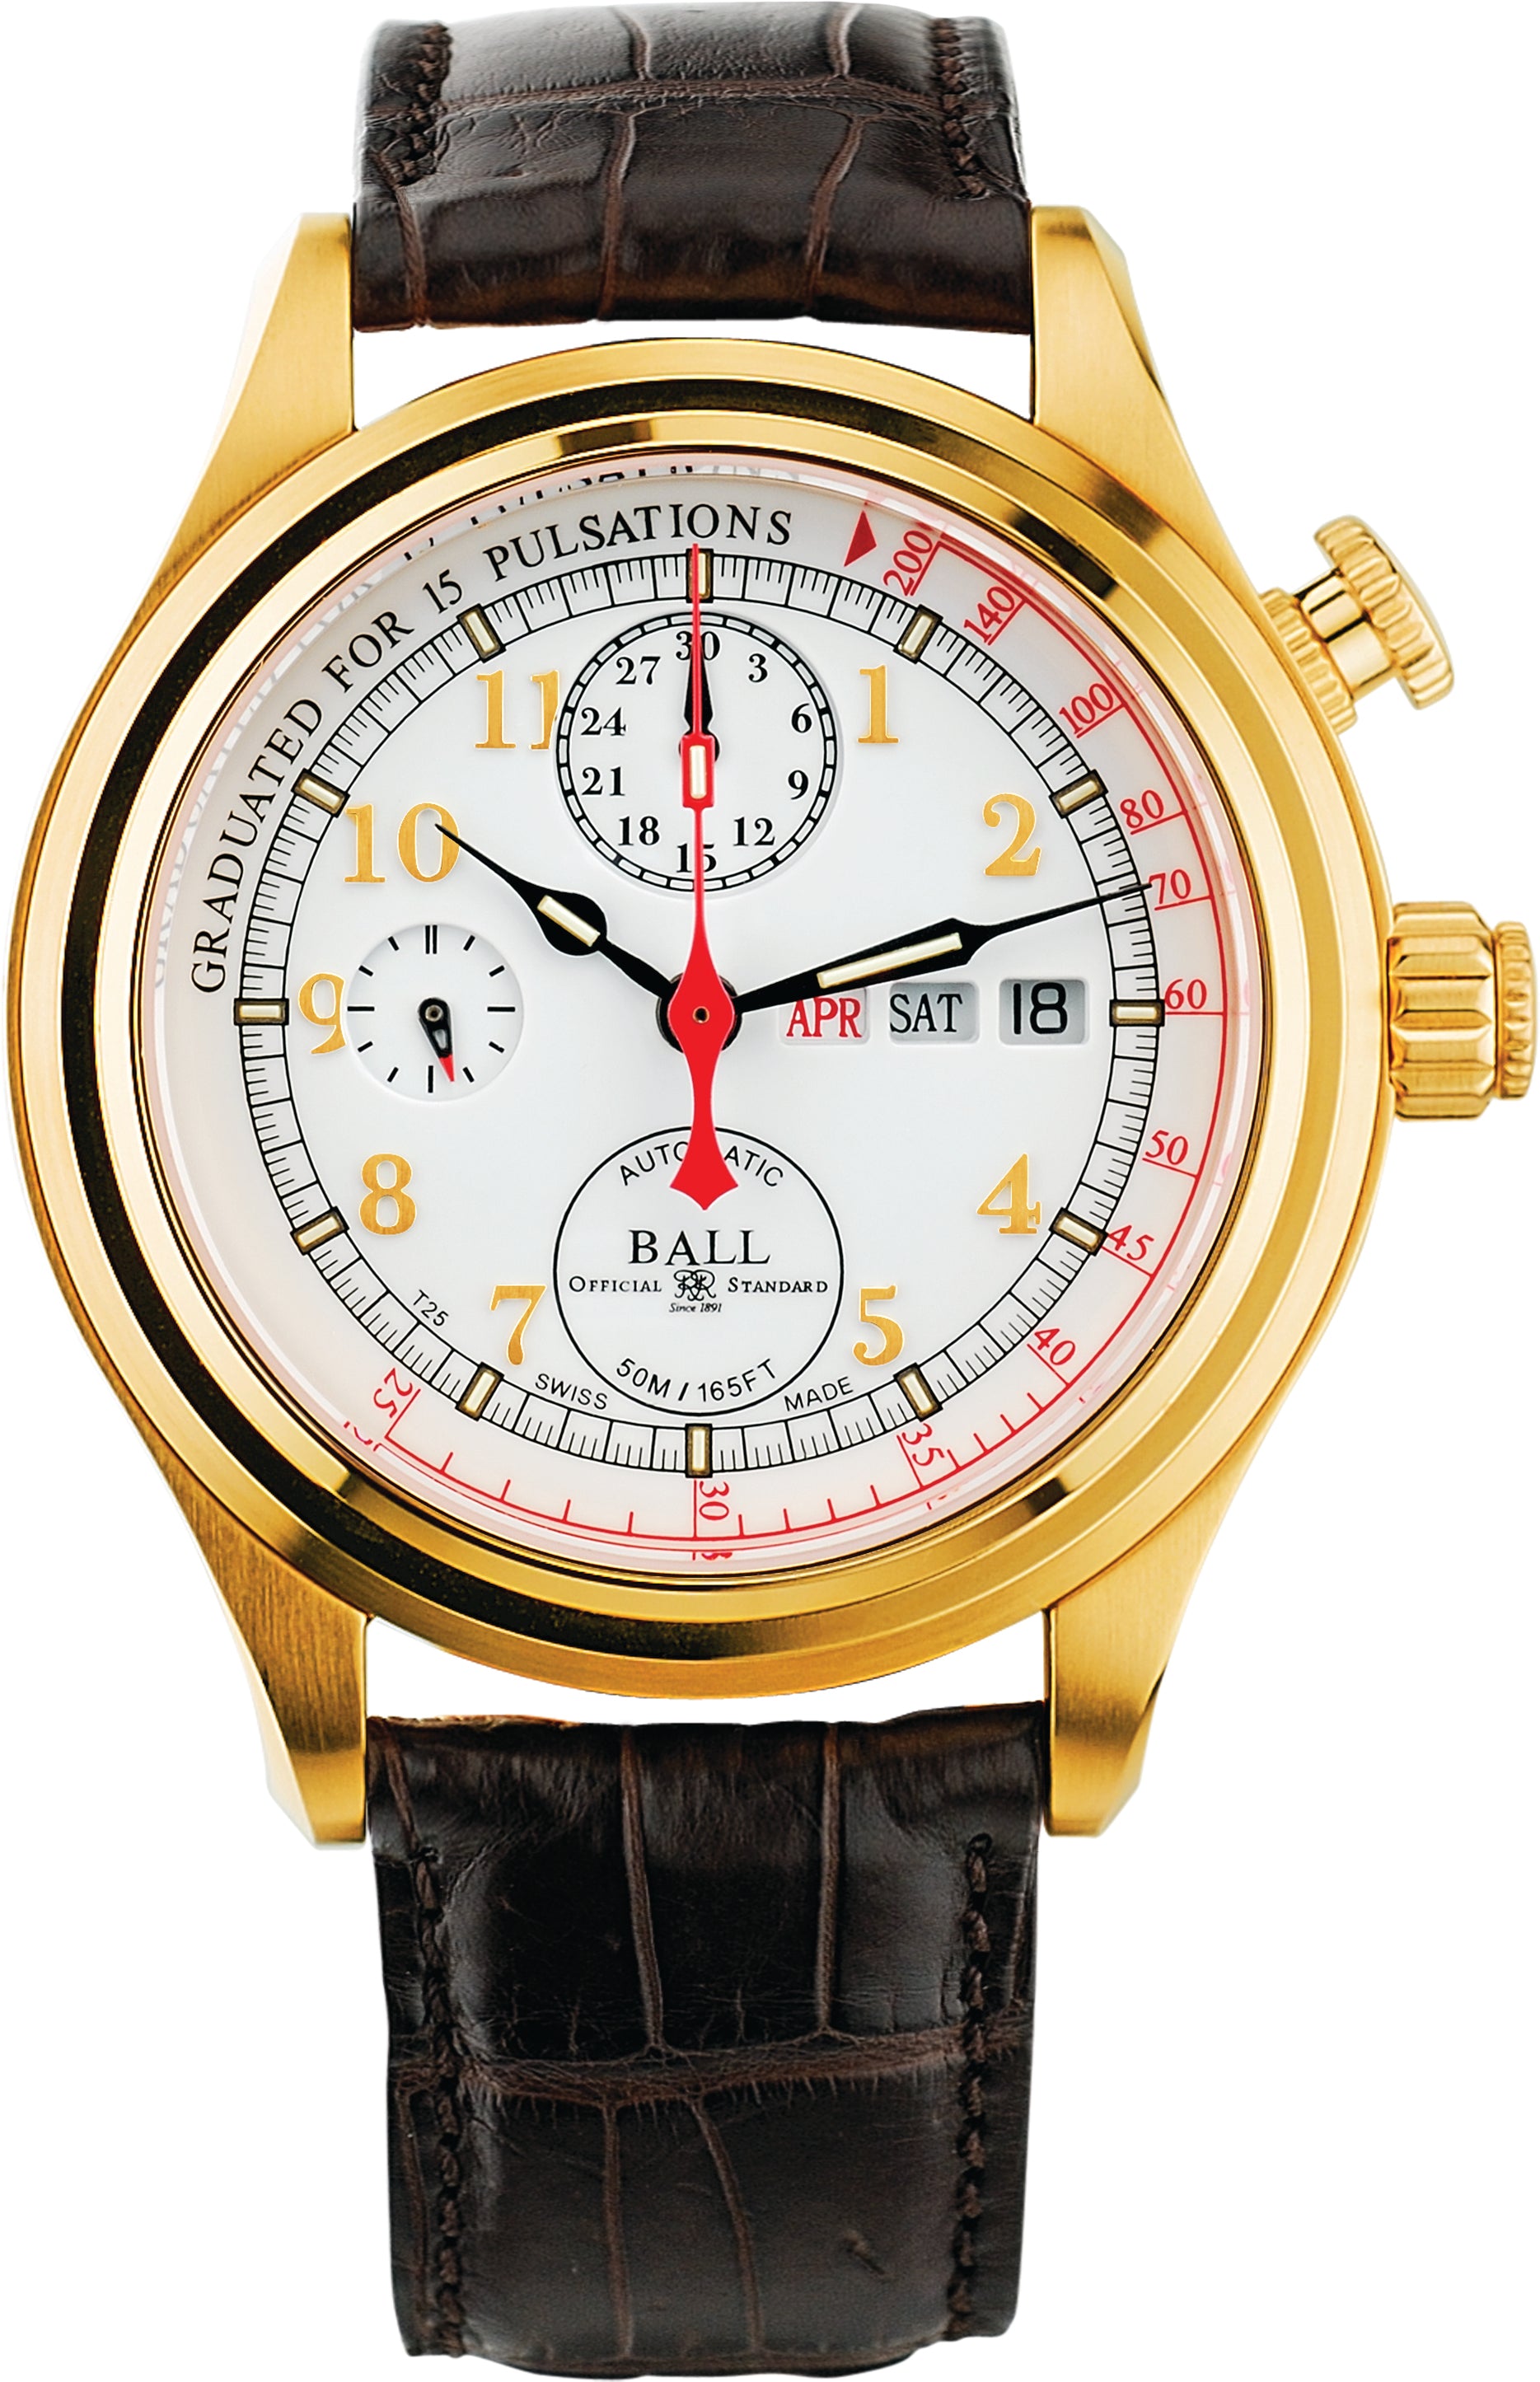 Photos - Wrist Watch Ball Watch Company Trainmaster Doctors Chronograph Limited Edition - White 